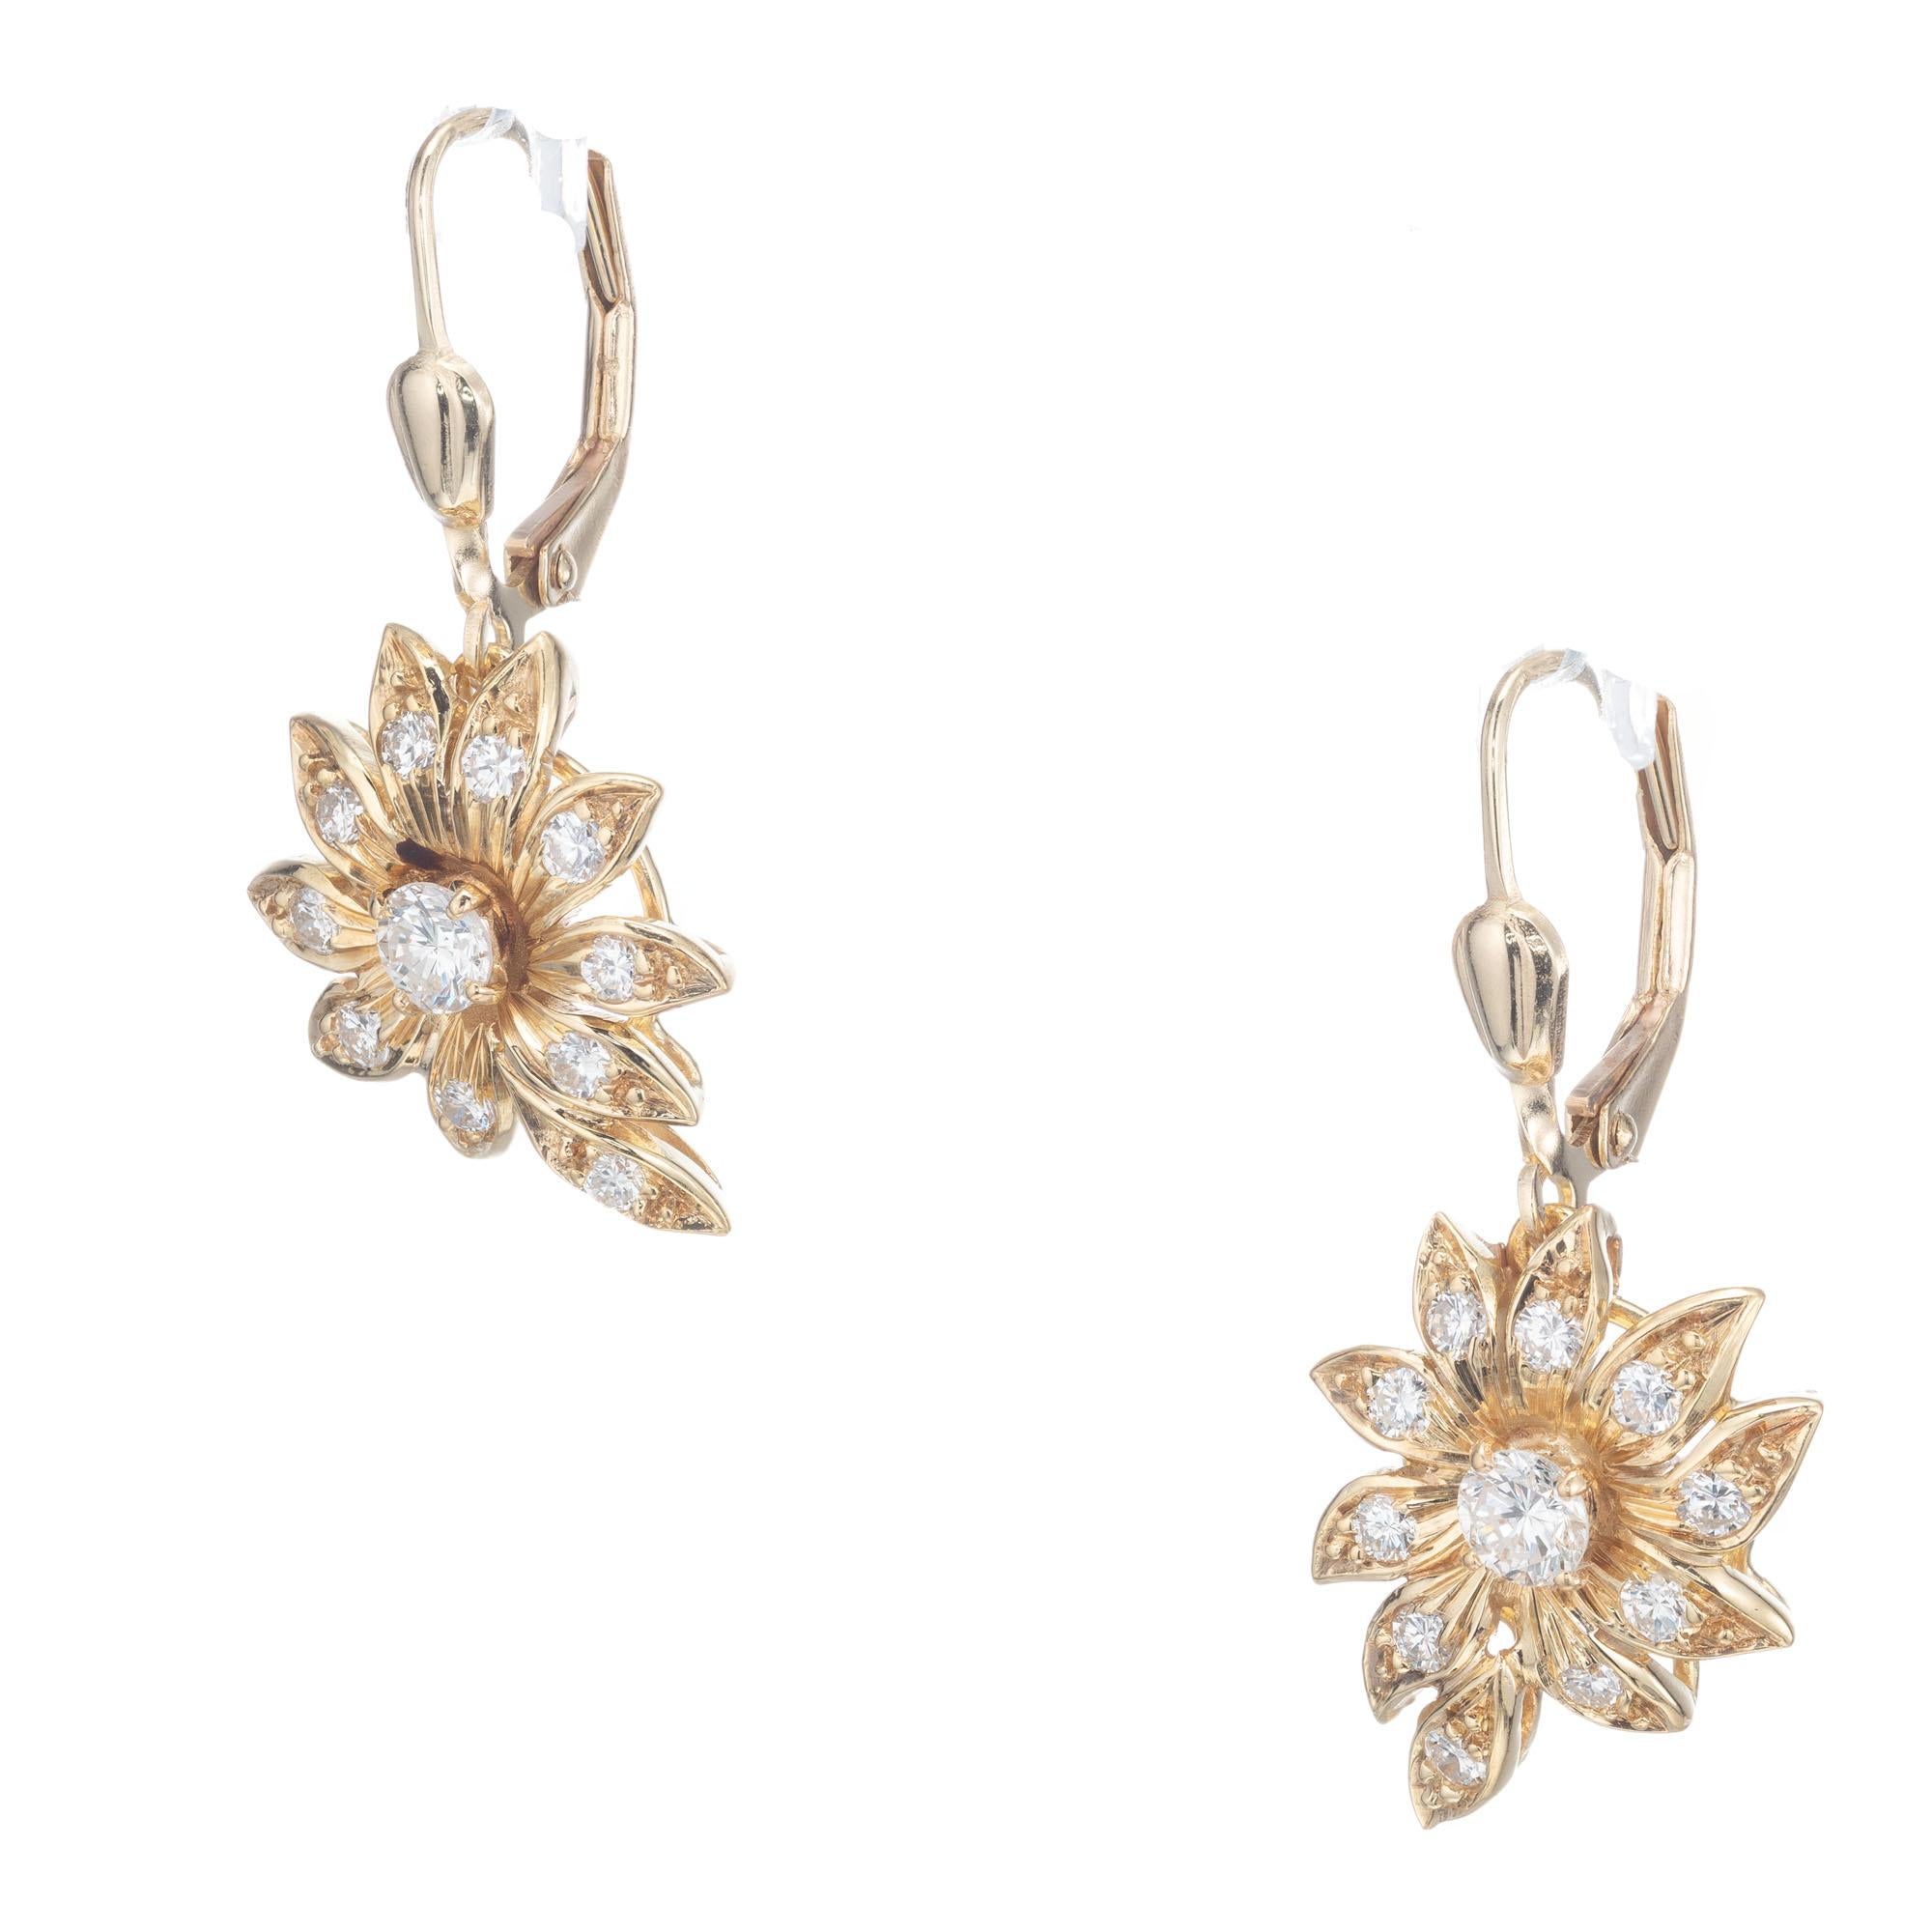 Diamond dangle flower earrings. 2 round center diamonds with 20 round accent diamonds in a flower design.

2 round diamonds, approx total weight: .30cts I-J VS-SI
20 round diamonds, approx total weight: .50cts G-H SI
Length: 1.23 inches or